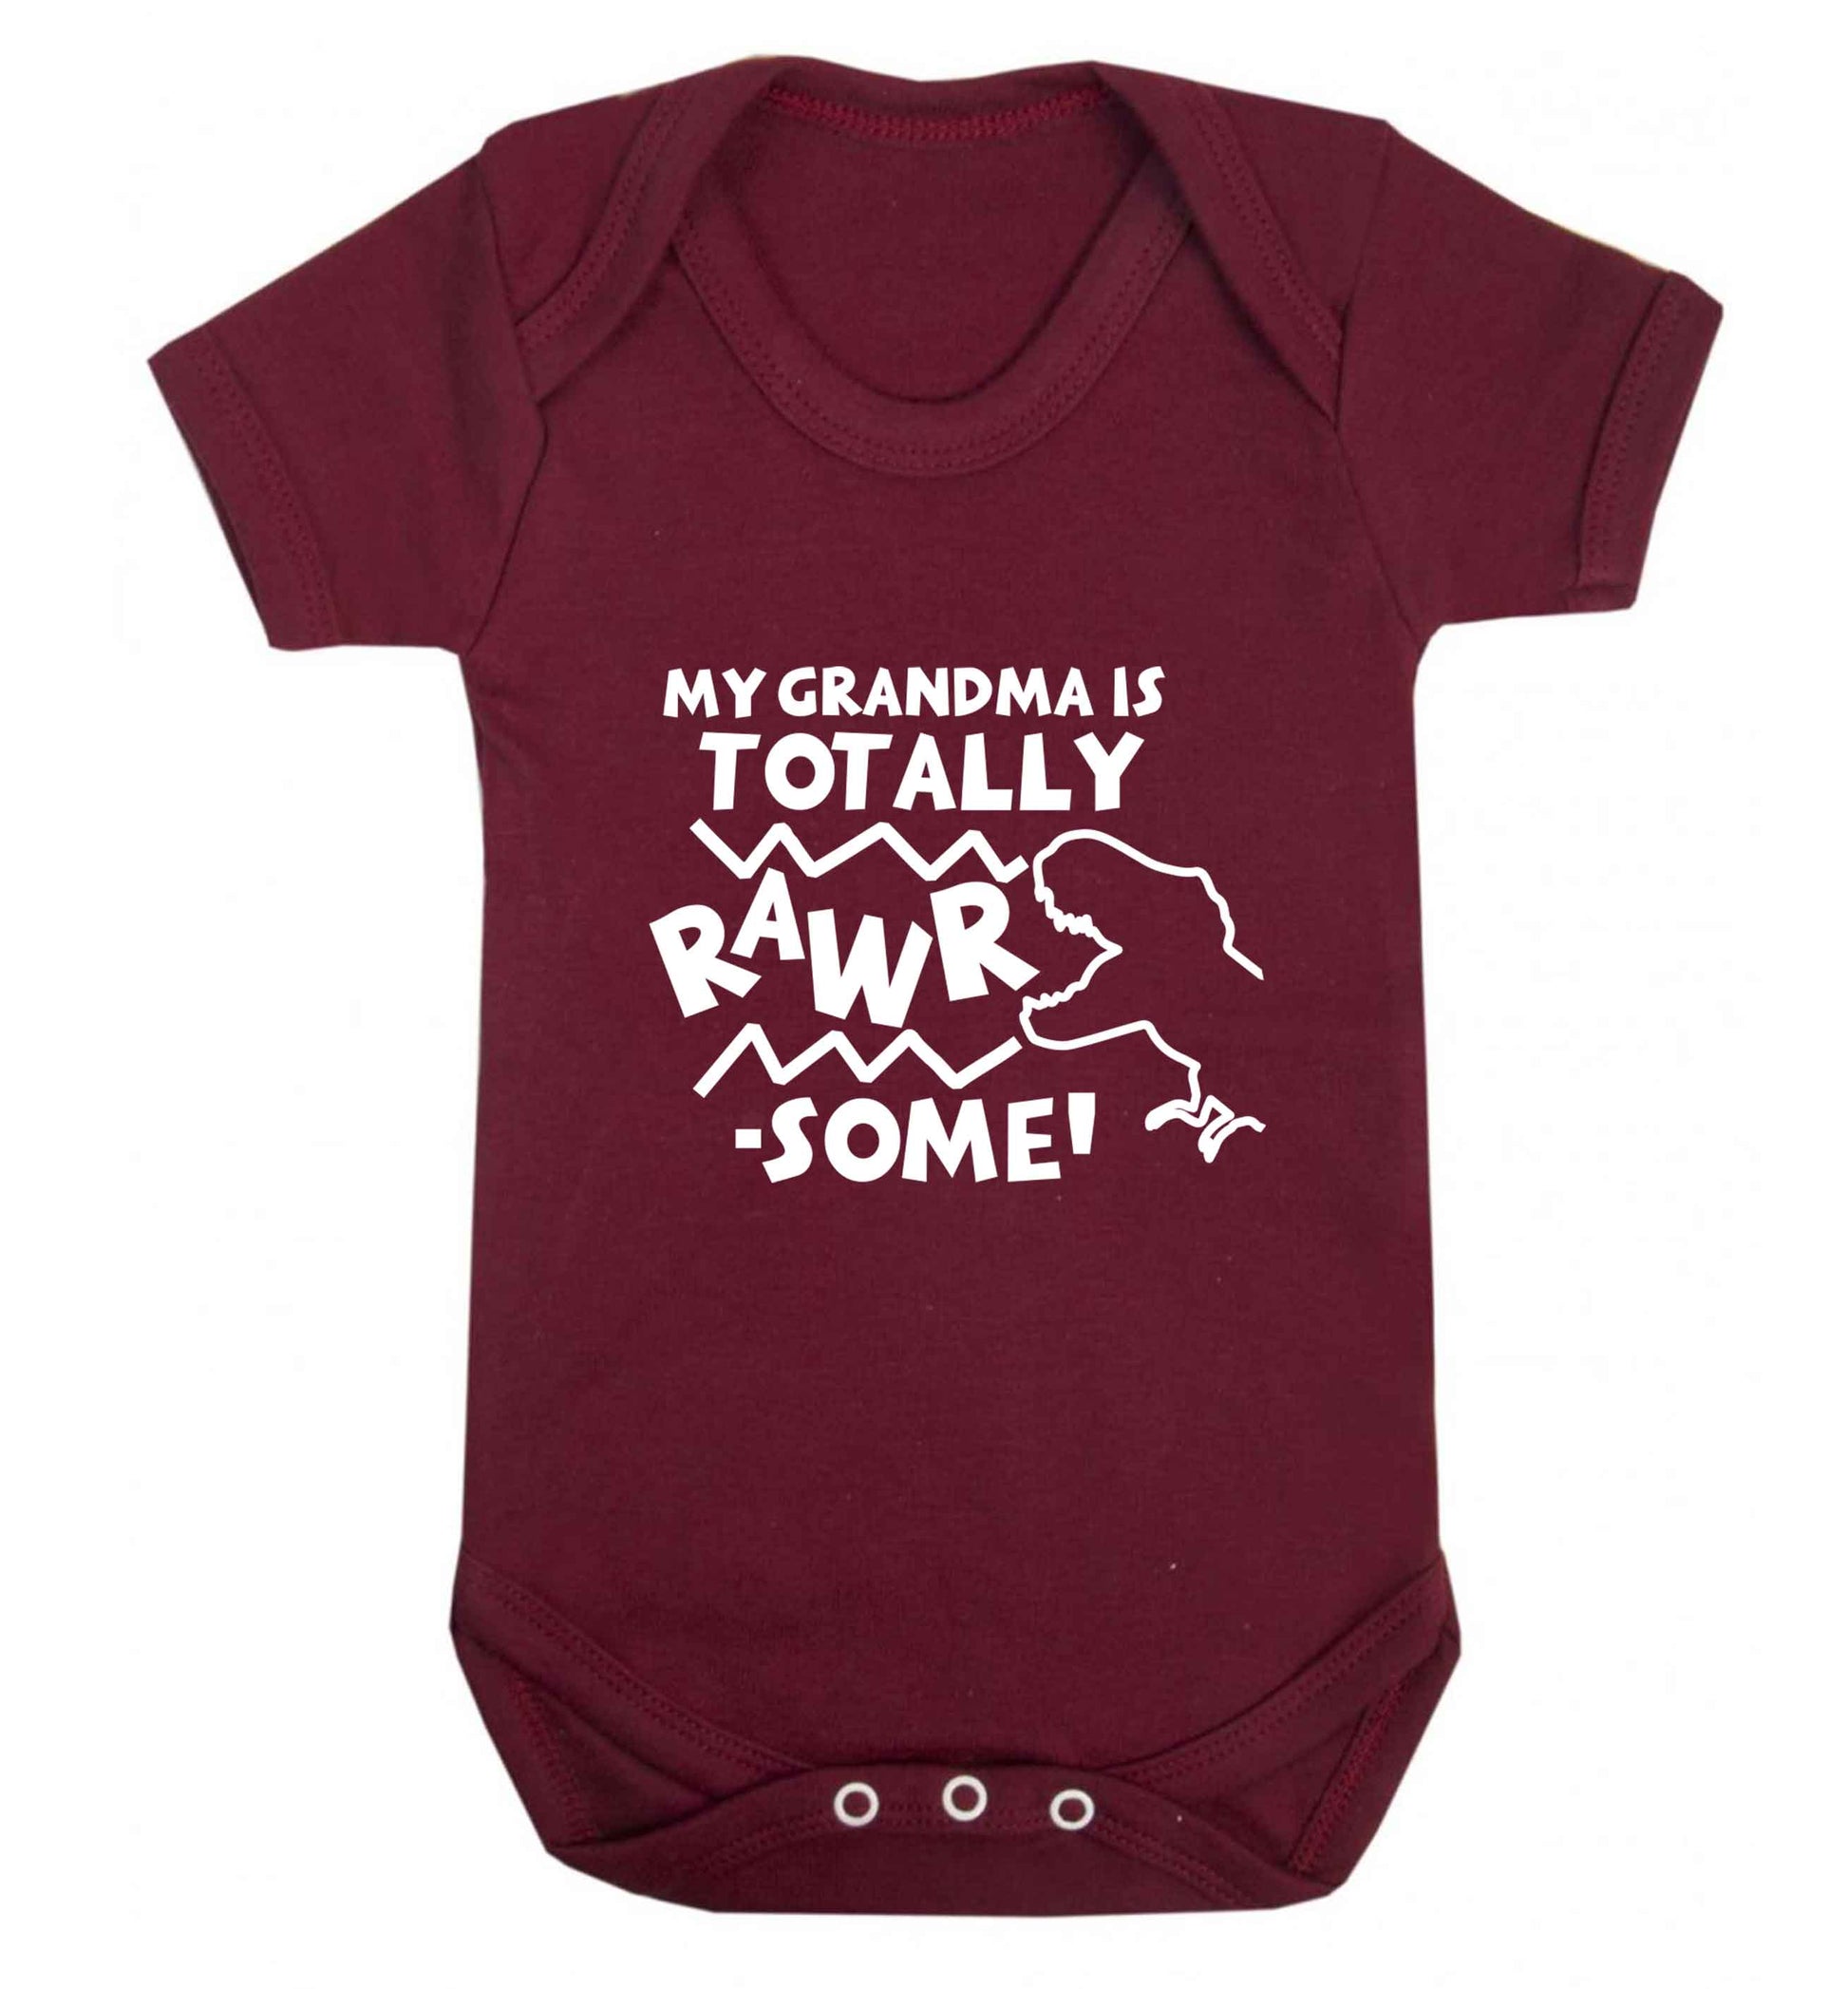 My grandma is totally rawrsome baby vest maroon 18-24 months